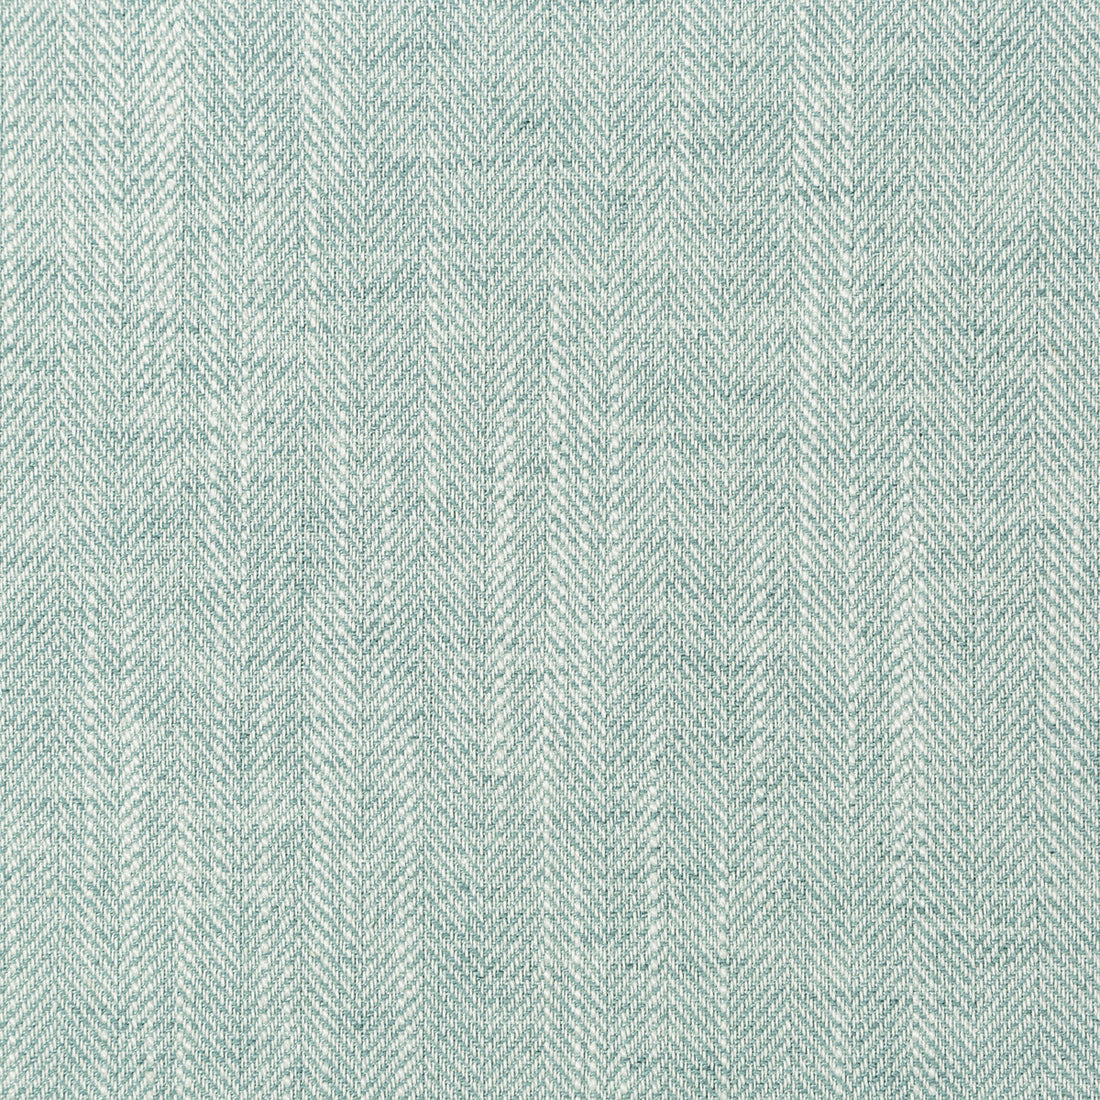 Mataru fabric in spa color - pattern 35763.135.0 - by Kravet Basics in the Ceylon collection